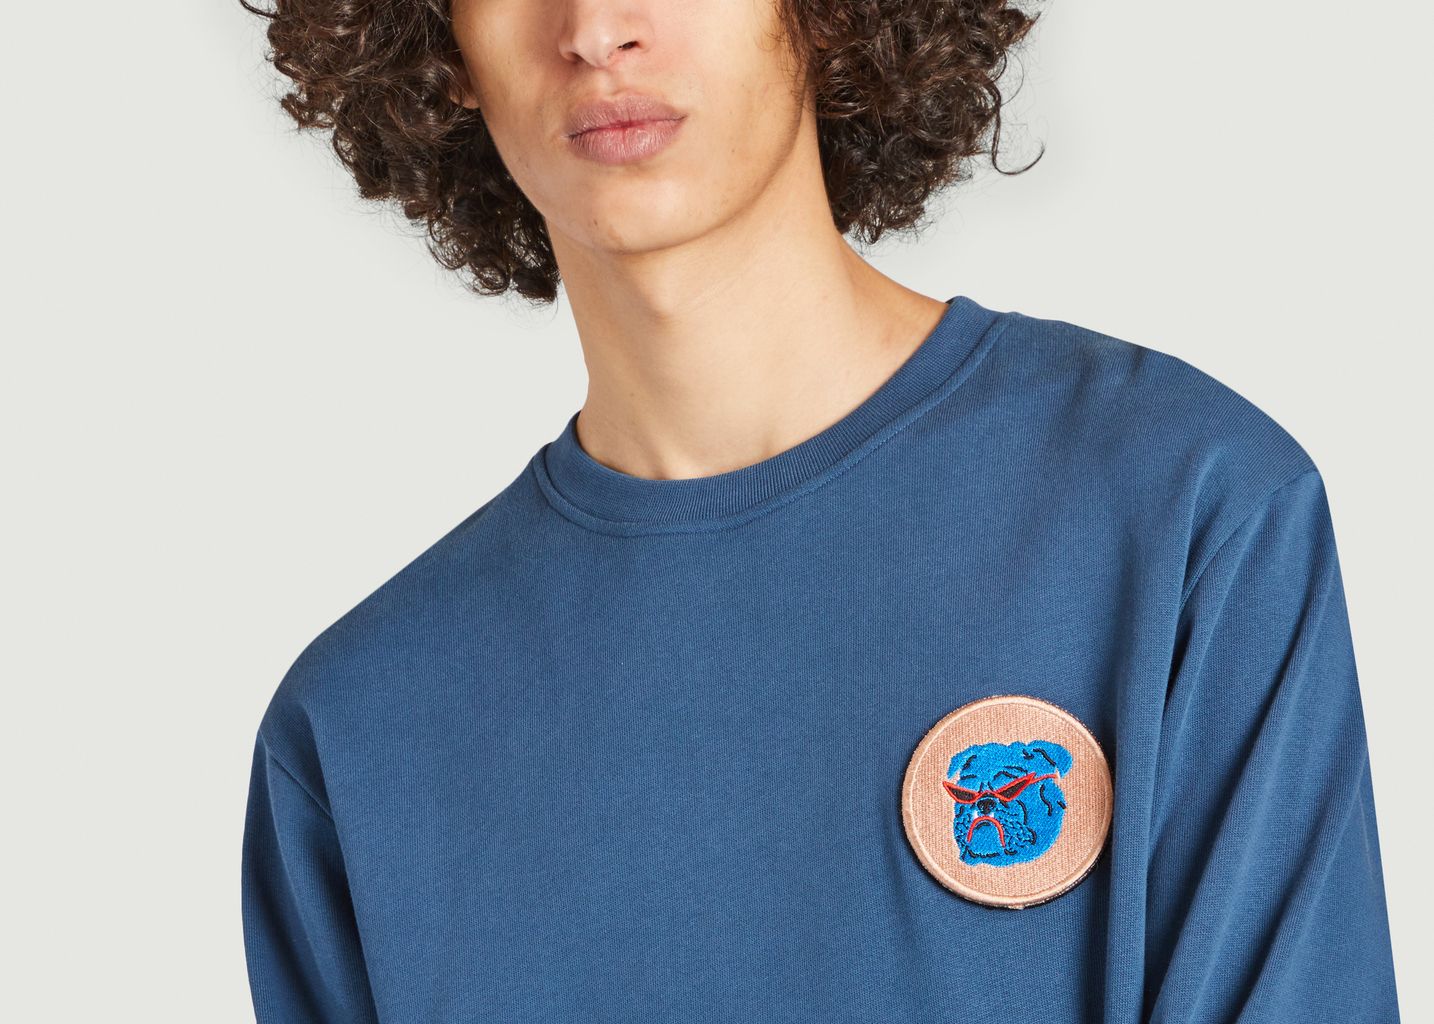 Scratchy Sweatshirt with 3 embroidered patches to scratch - Olow